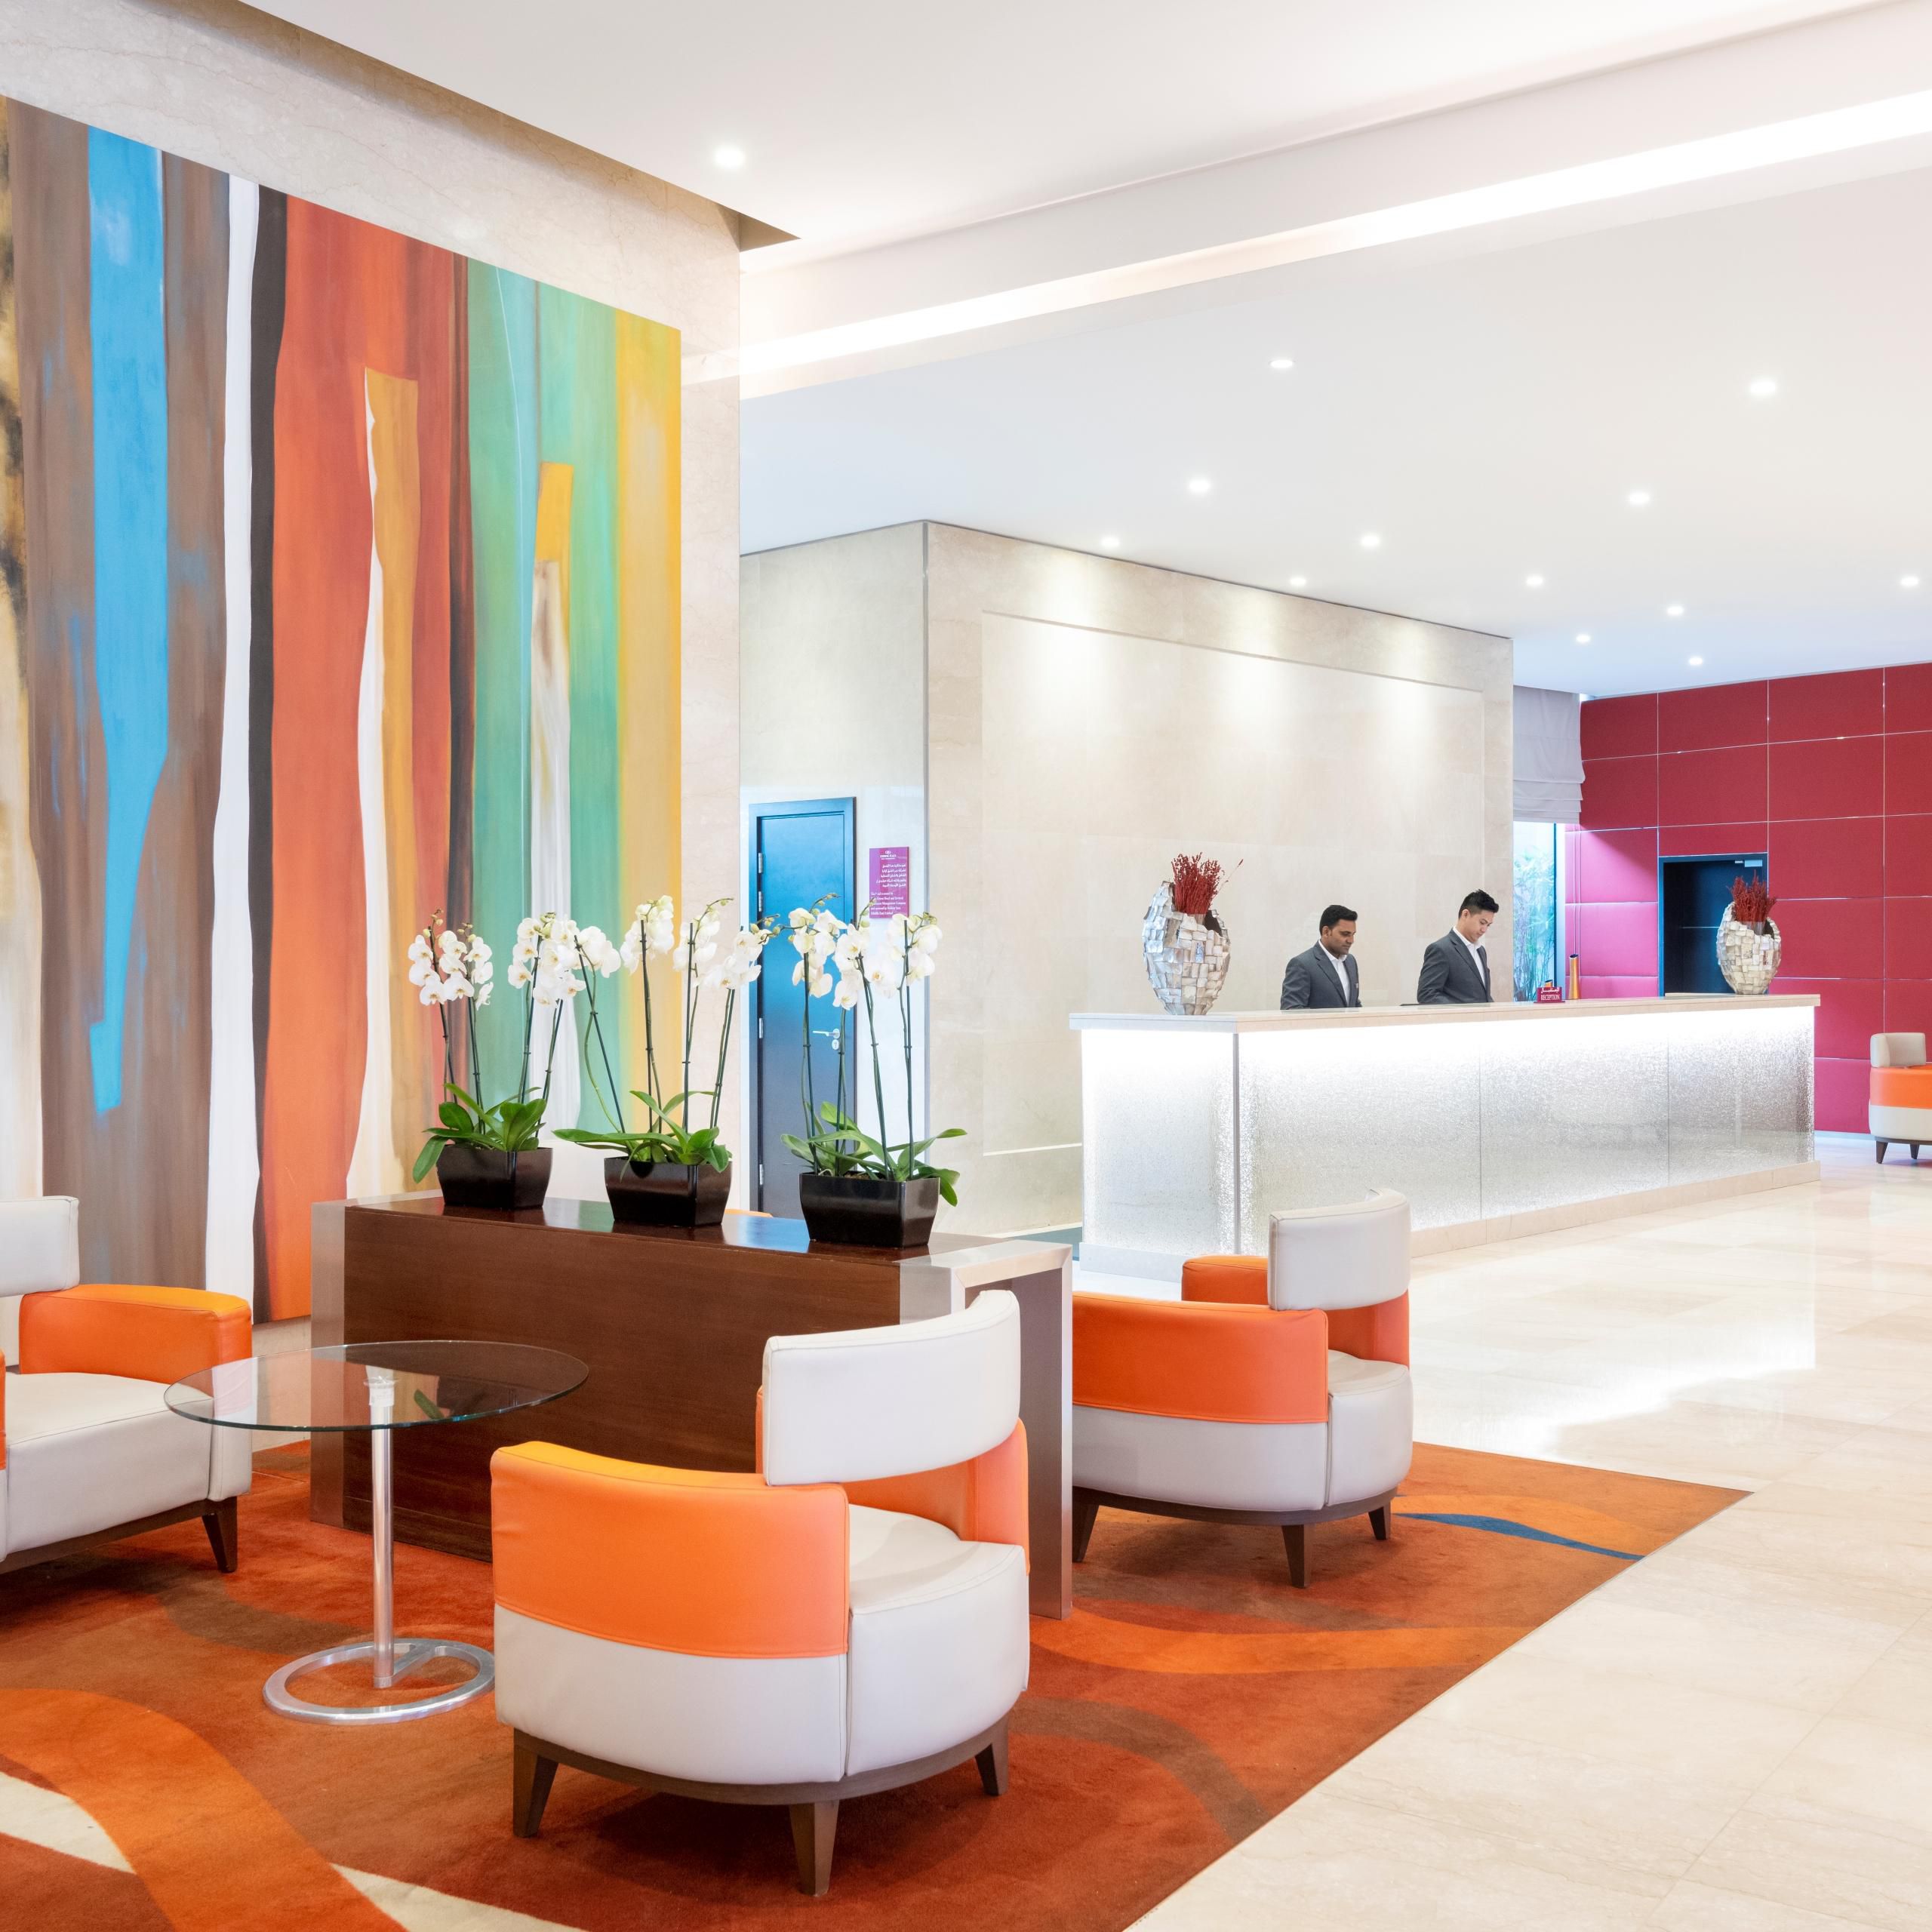 Bright and colorful, our lobby is a refreshing place to meet in.